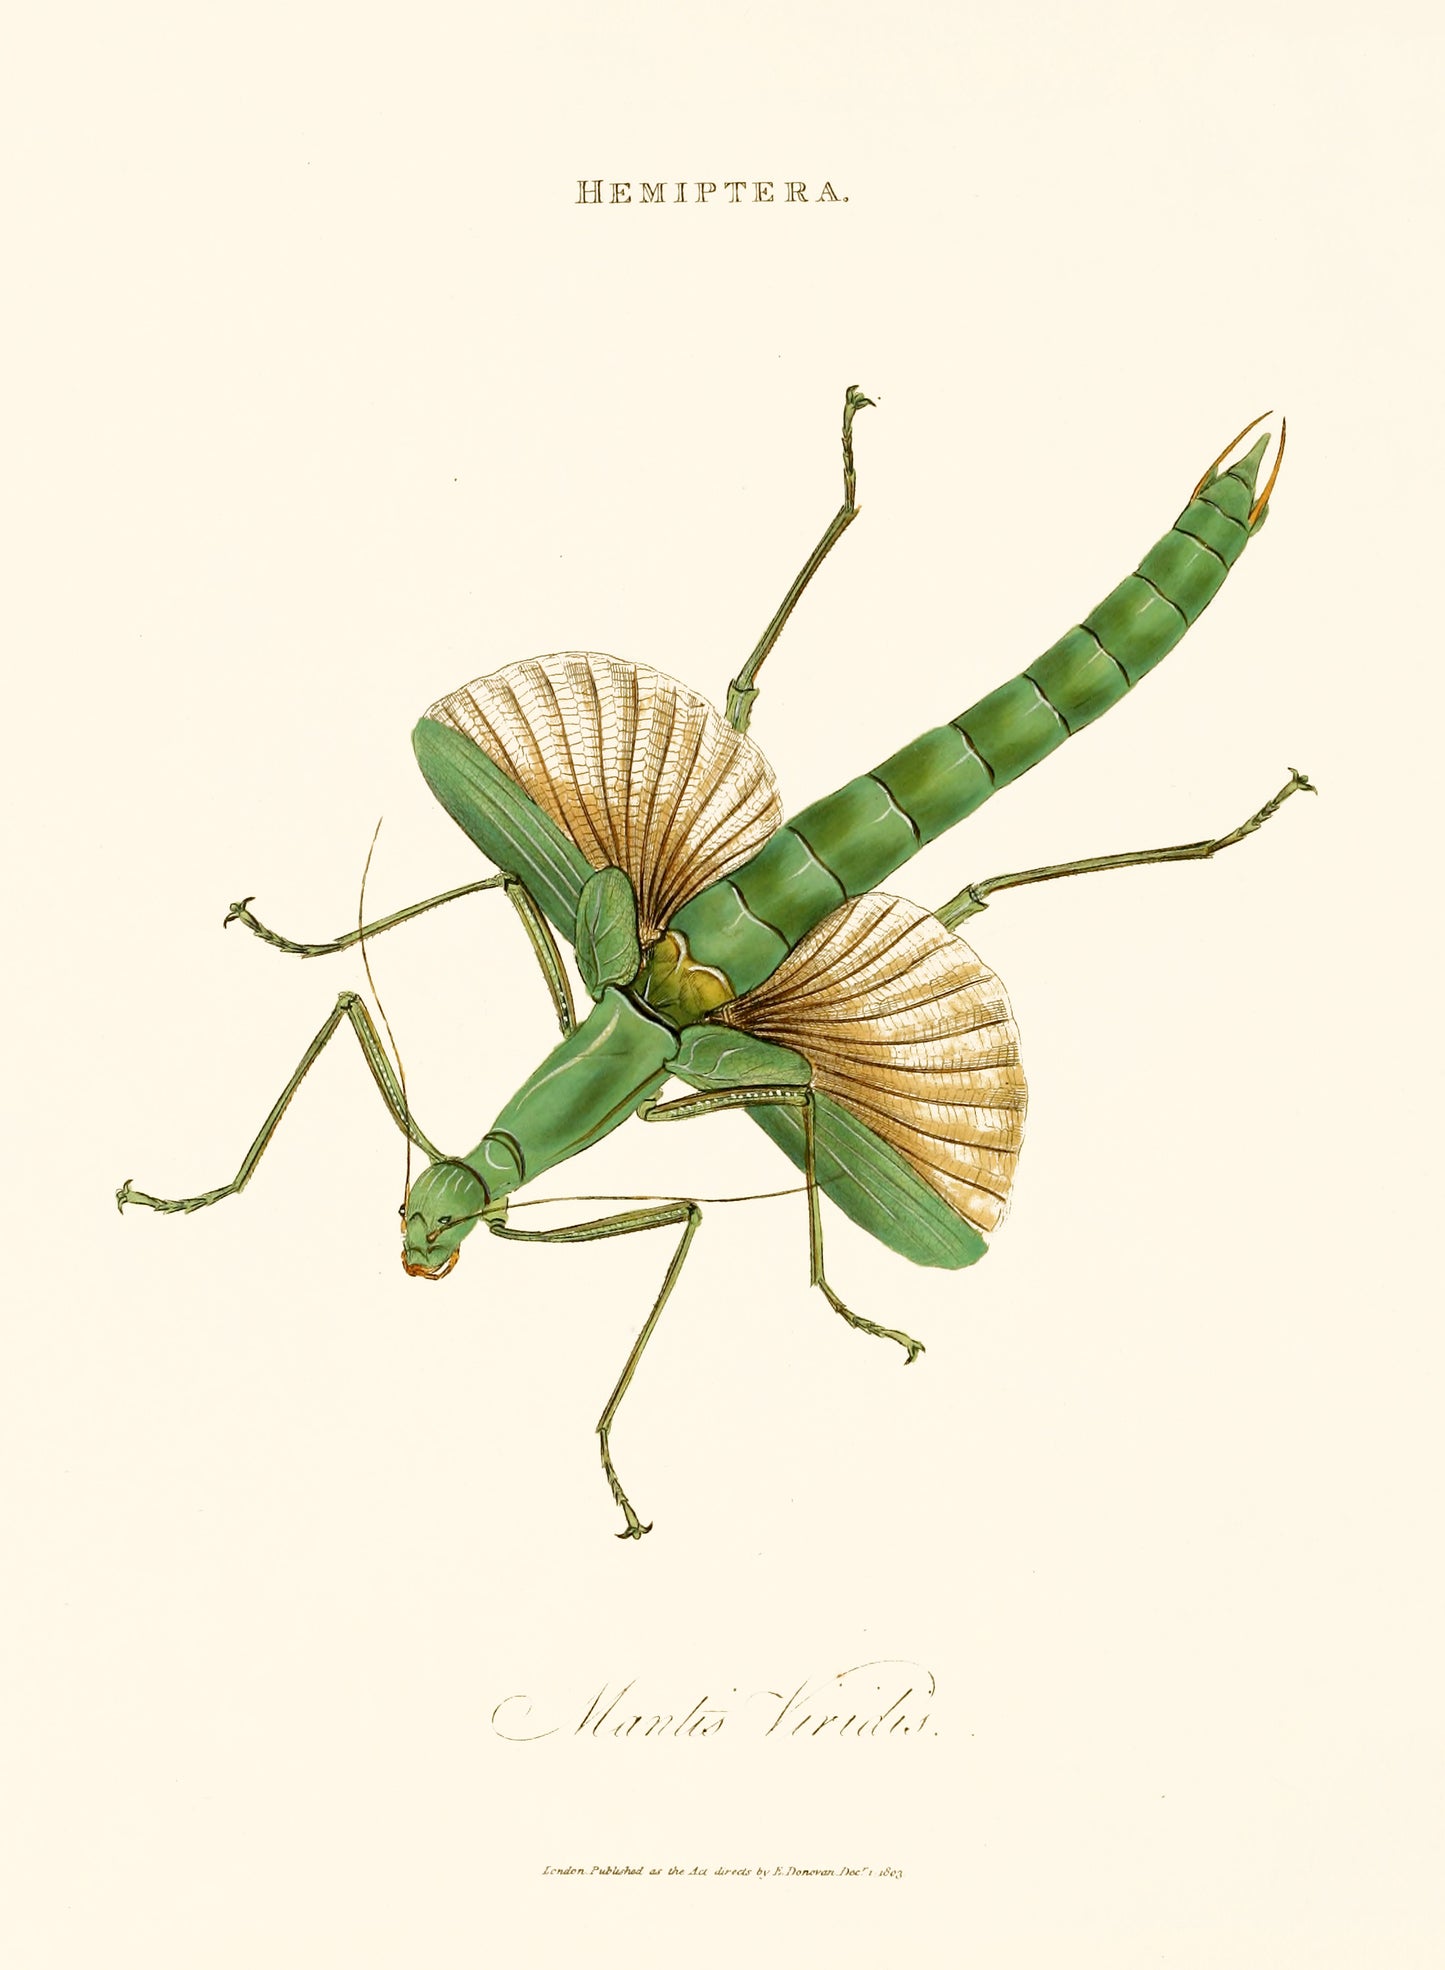 Epitome of the Natural History of the Insects of India [40 Images]